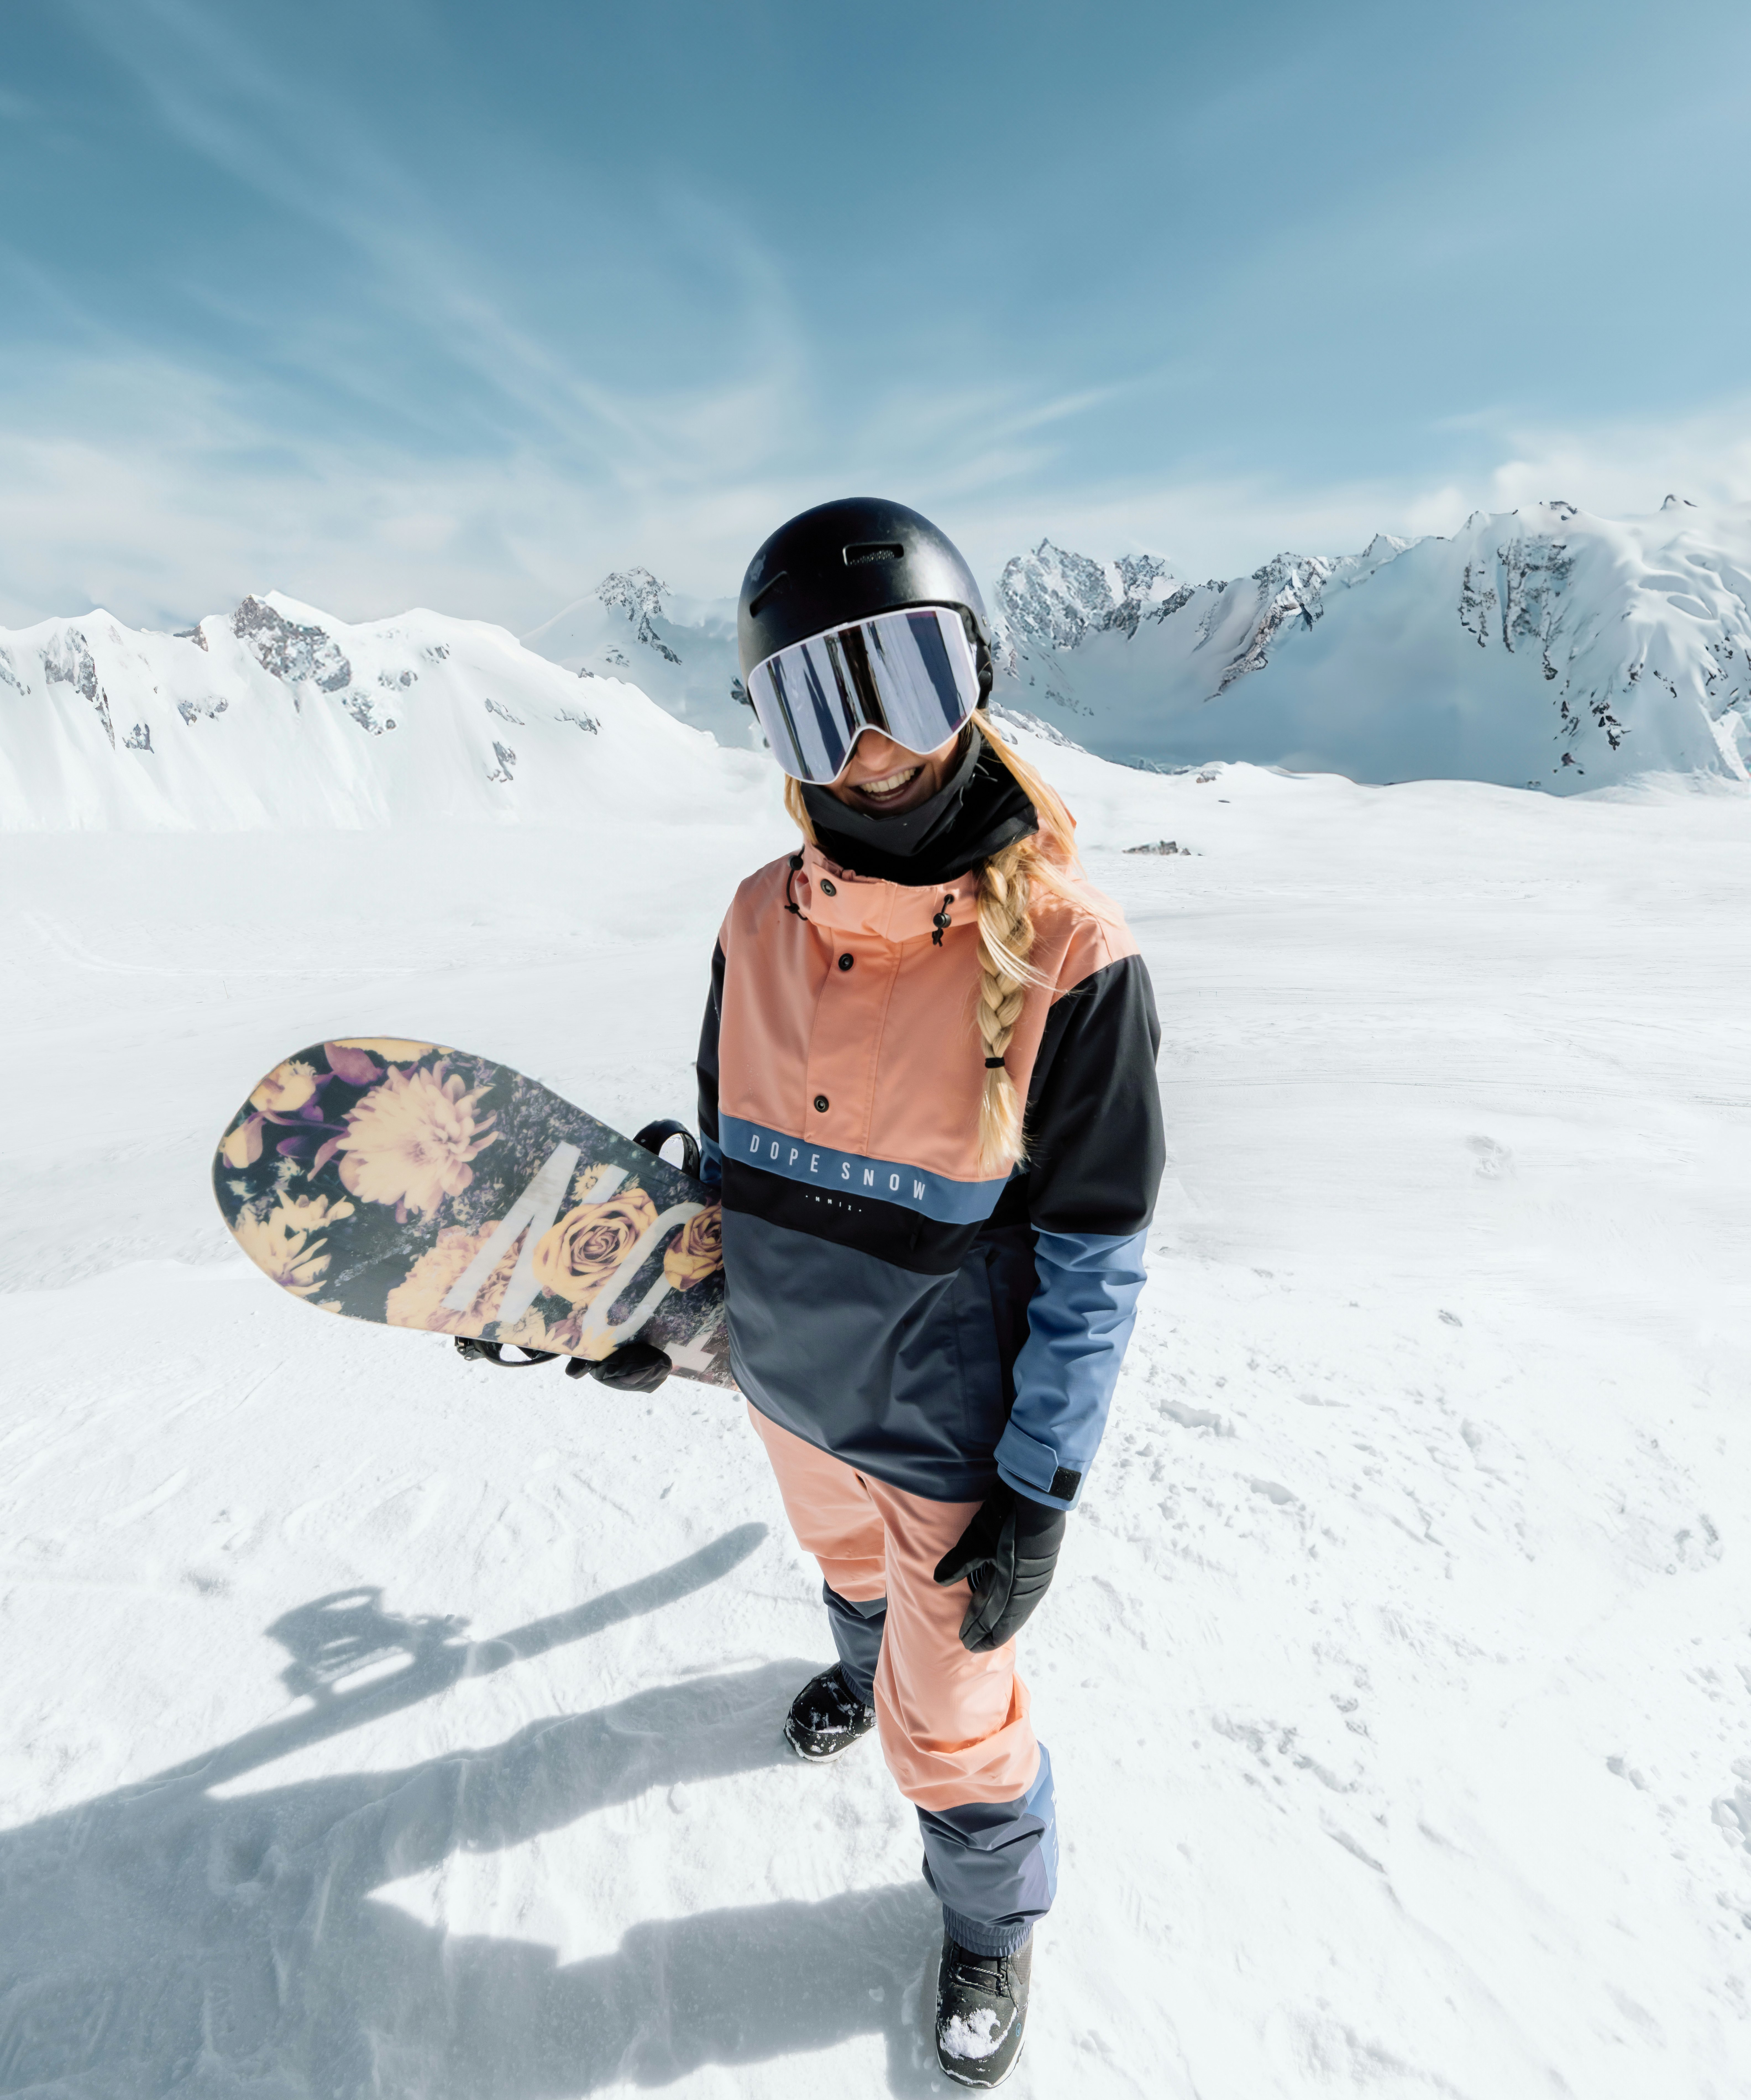 How to wax a snowboard | Dope Magazine